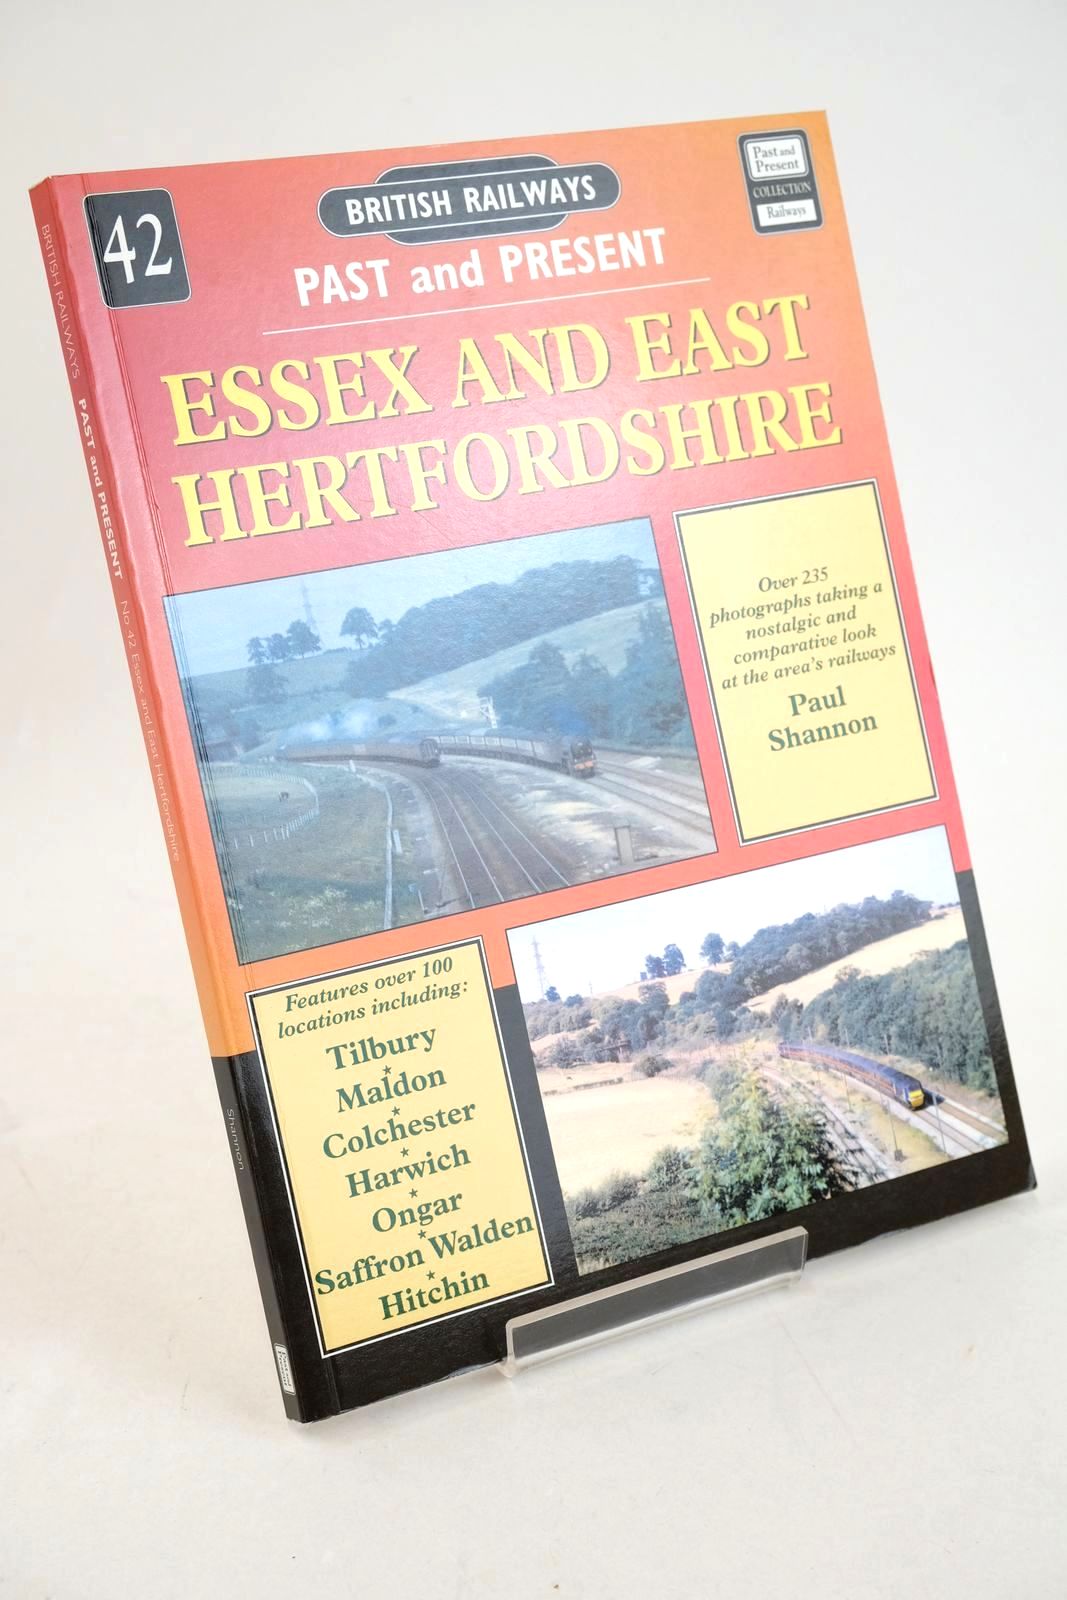 Photo of BRITISH RAILWAYS PAST AND PRESENT No. 42 ESSEX AND EAST HERTFORDSHIRE written by Shannon, Paul published by Past and Present Publishing Ltd. (STOCK CODE: 1327540)  for sale by Stella & Rose's Books